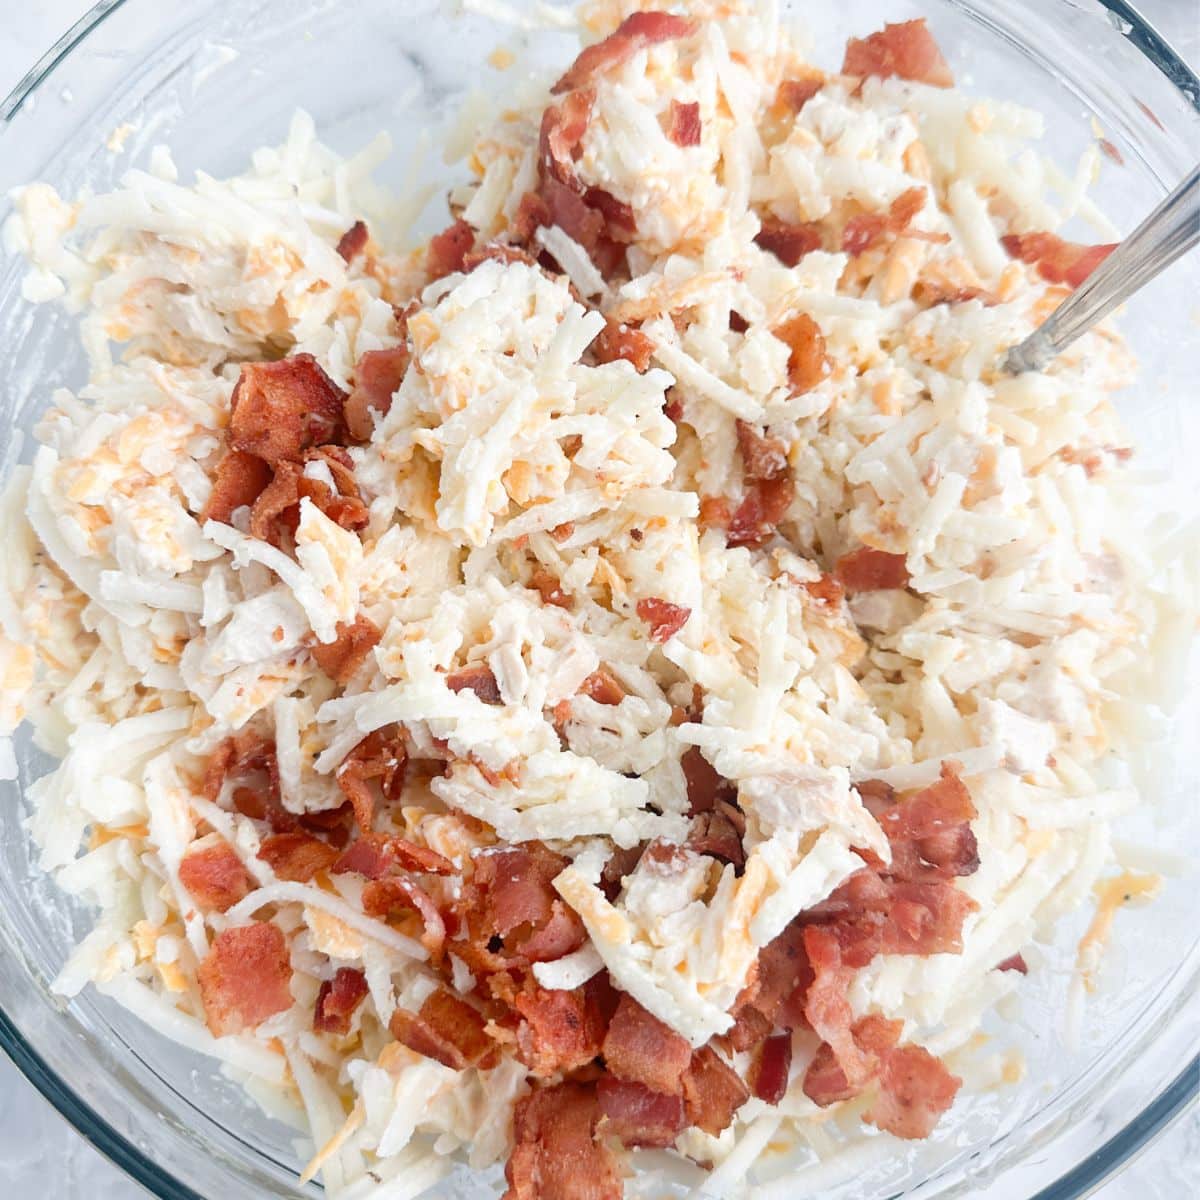 Bowl with hash browns, bacon crumbles, and chicken. 